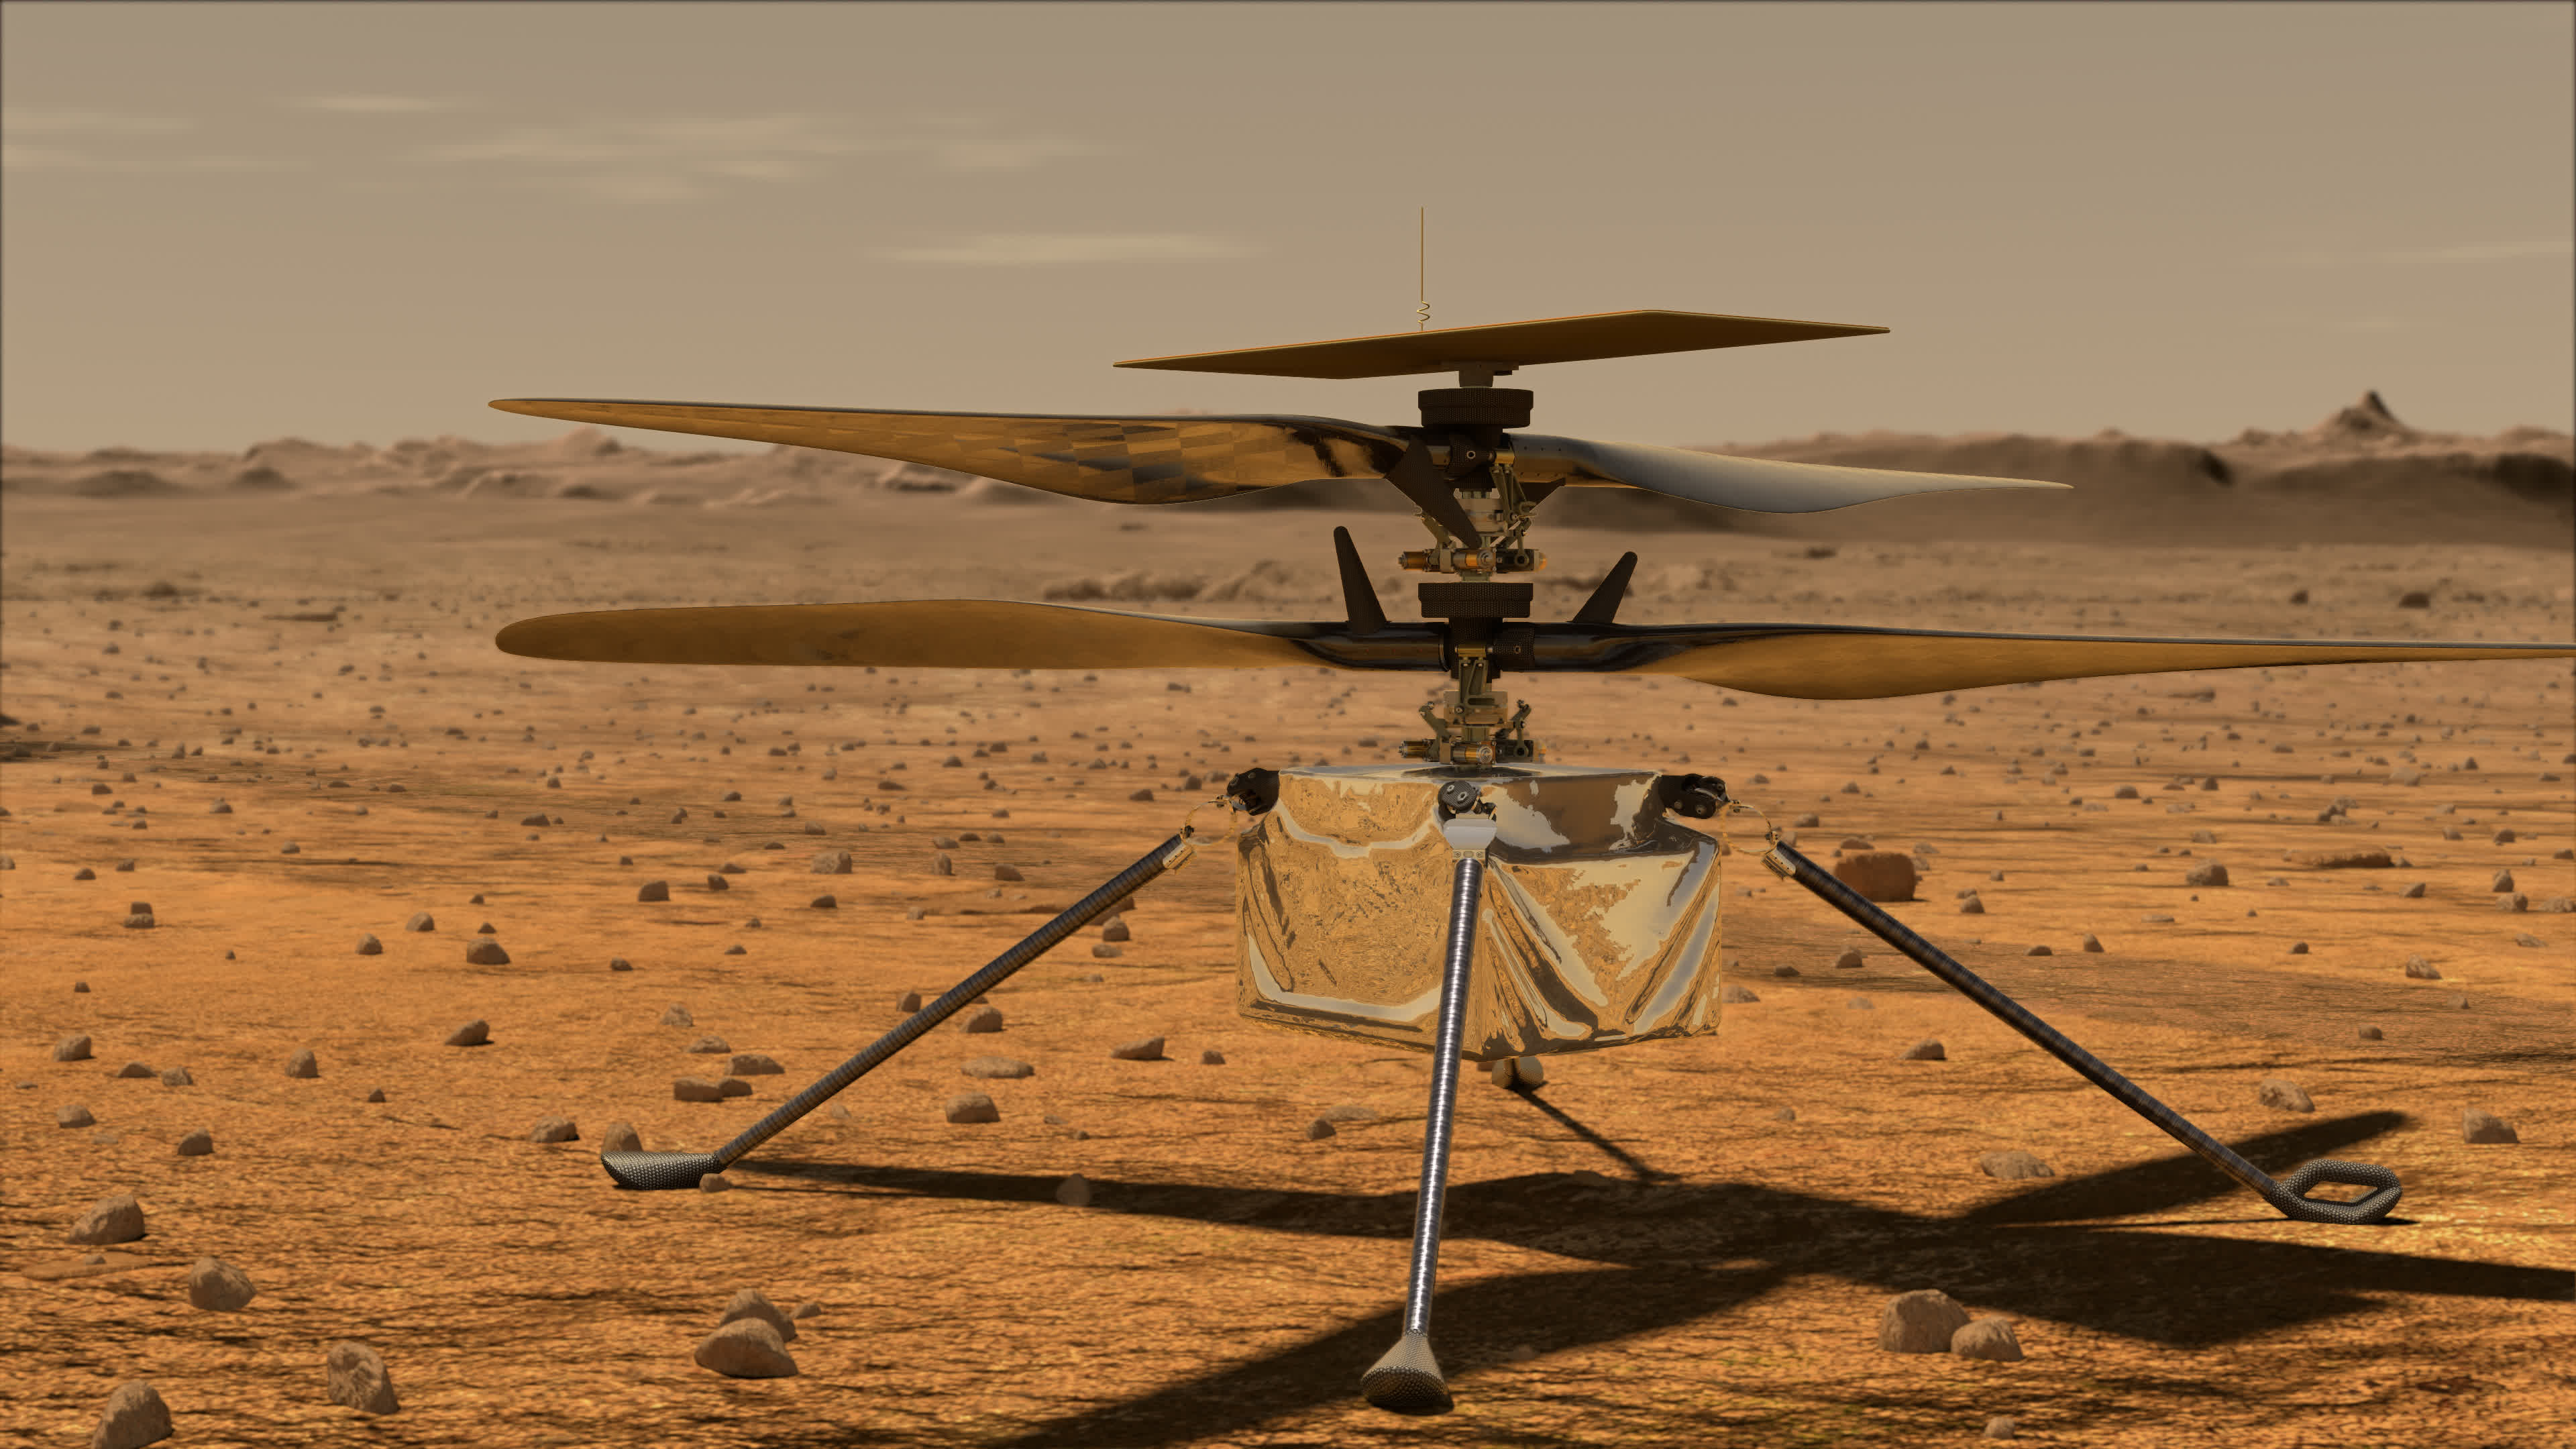 NASA's 'Mars Helicopter' Ingenuity will reach the Red Planet next month